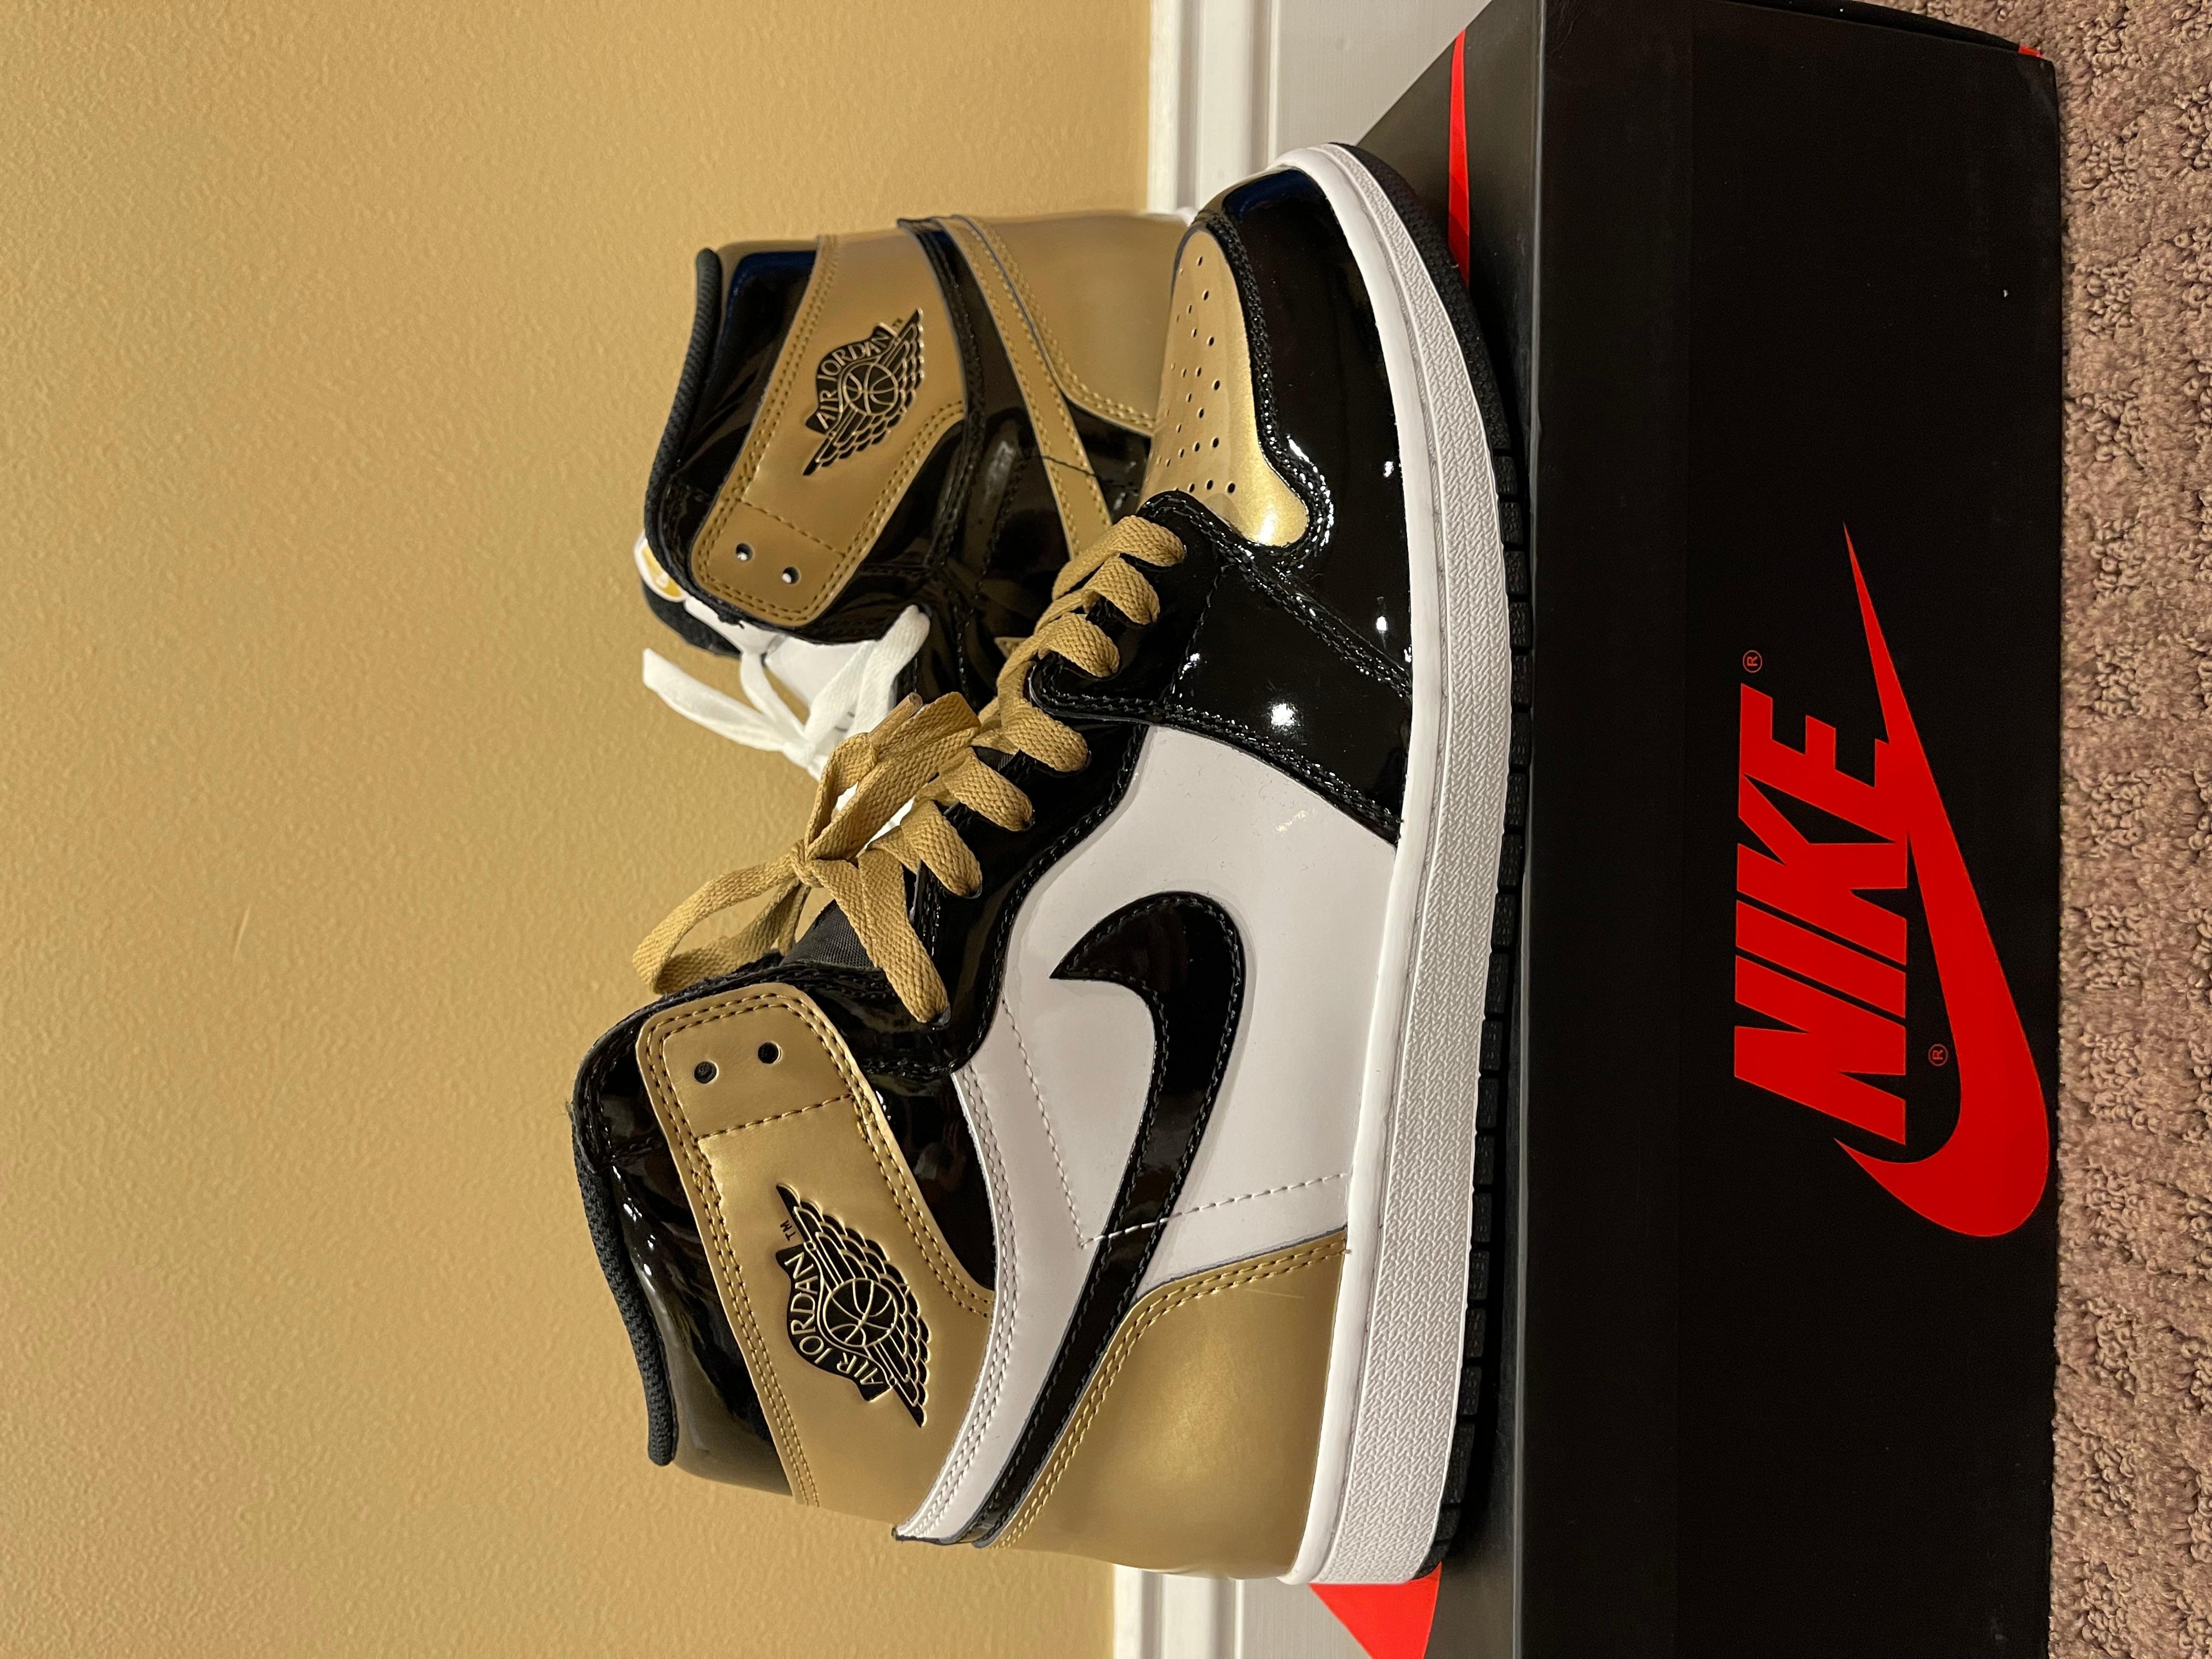 Air Jordan 1 Top 3 Gold
Size 11
Excellent condition (worn x1)
Og all with receipt from Union (purchased at ComplexCon)